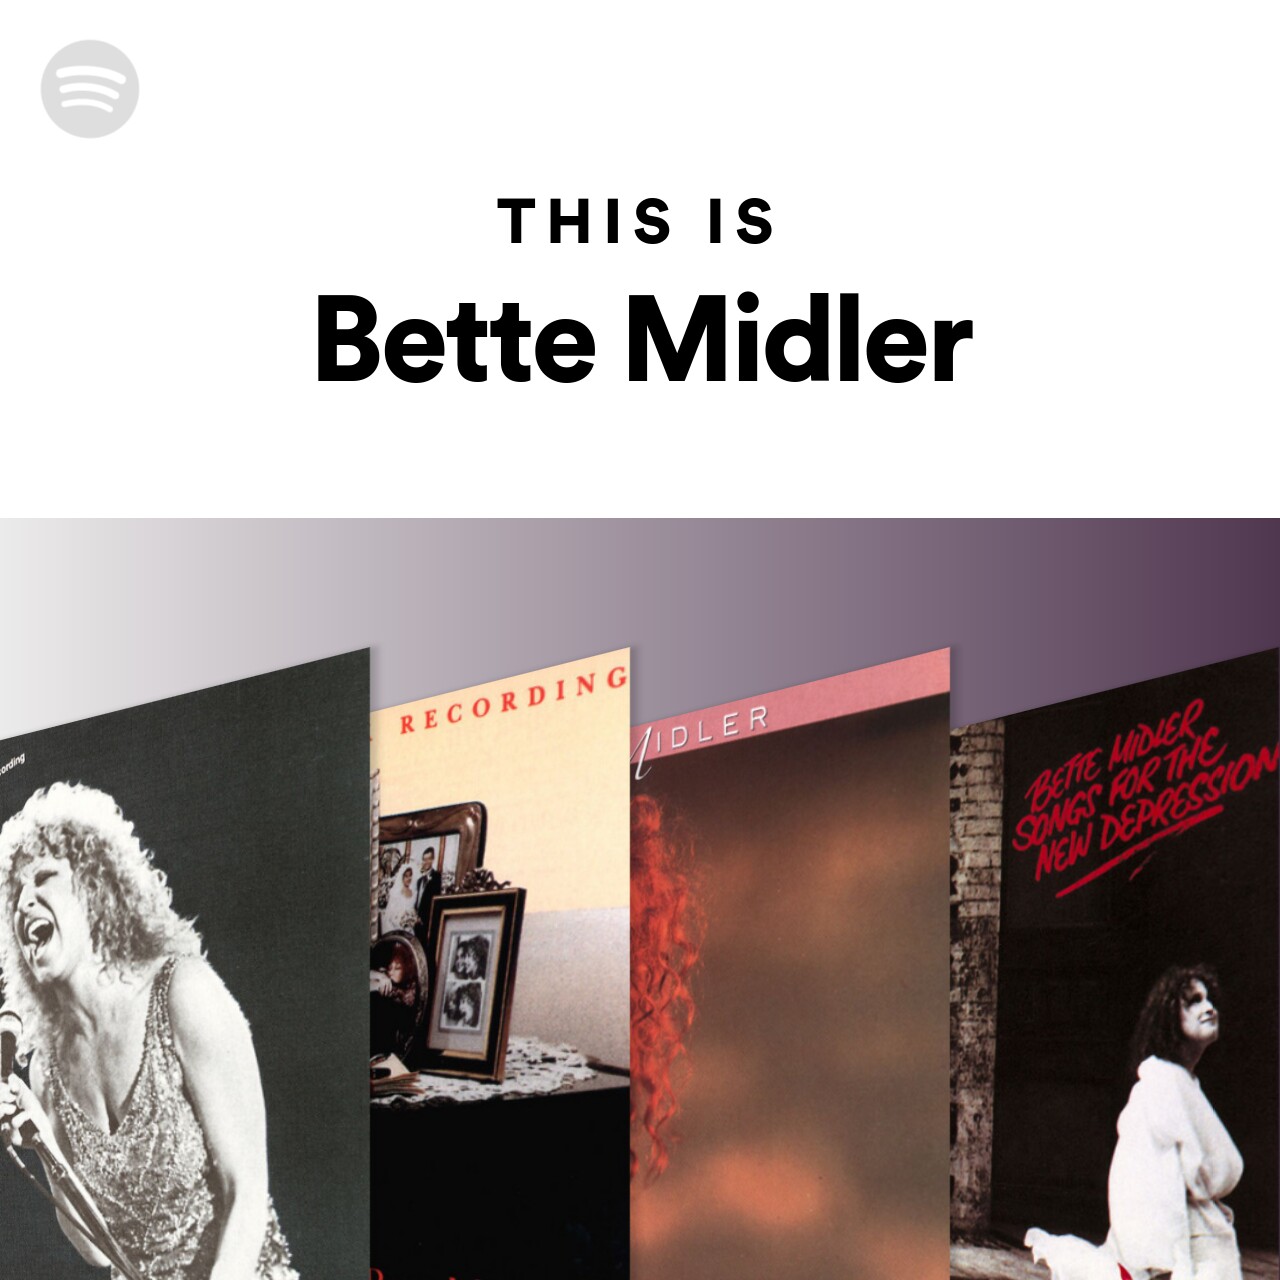 This is Bette Midler